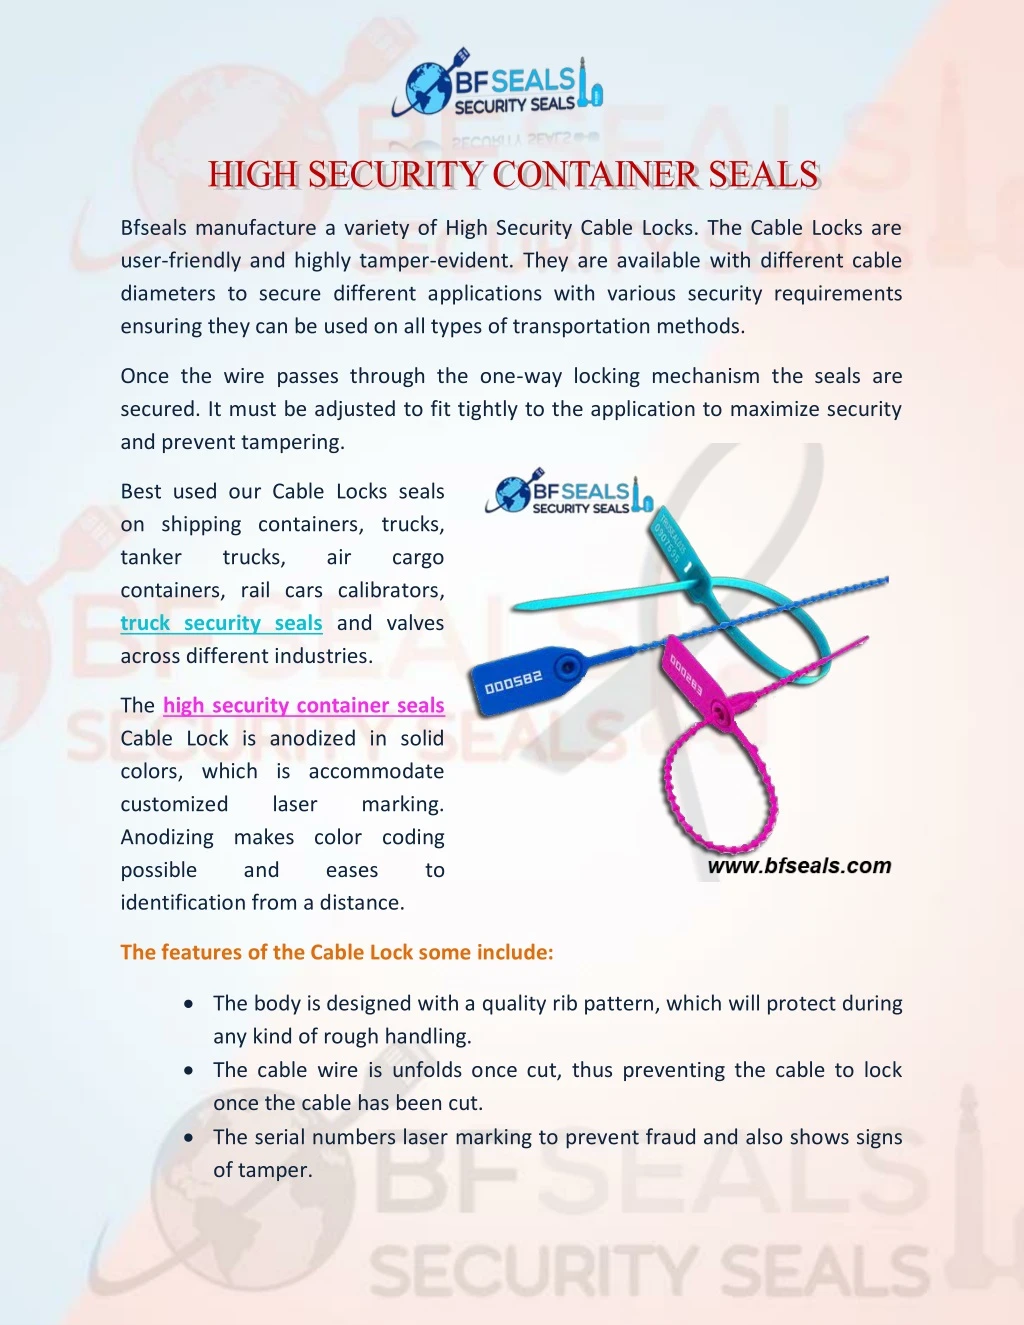 bfseals manufacture a variety of high security